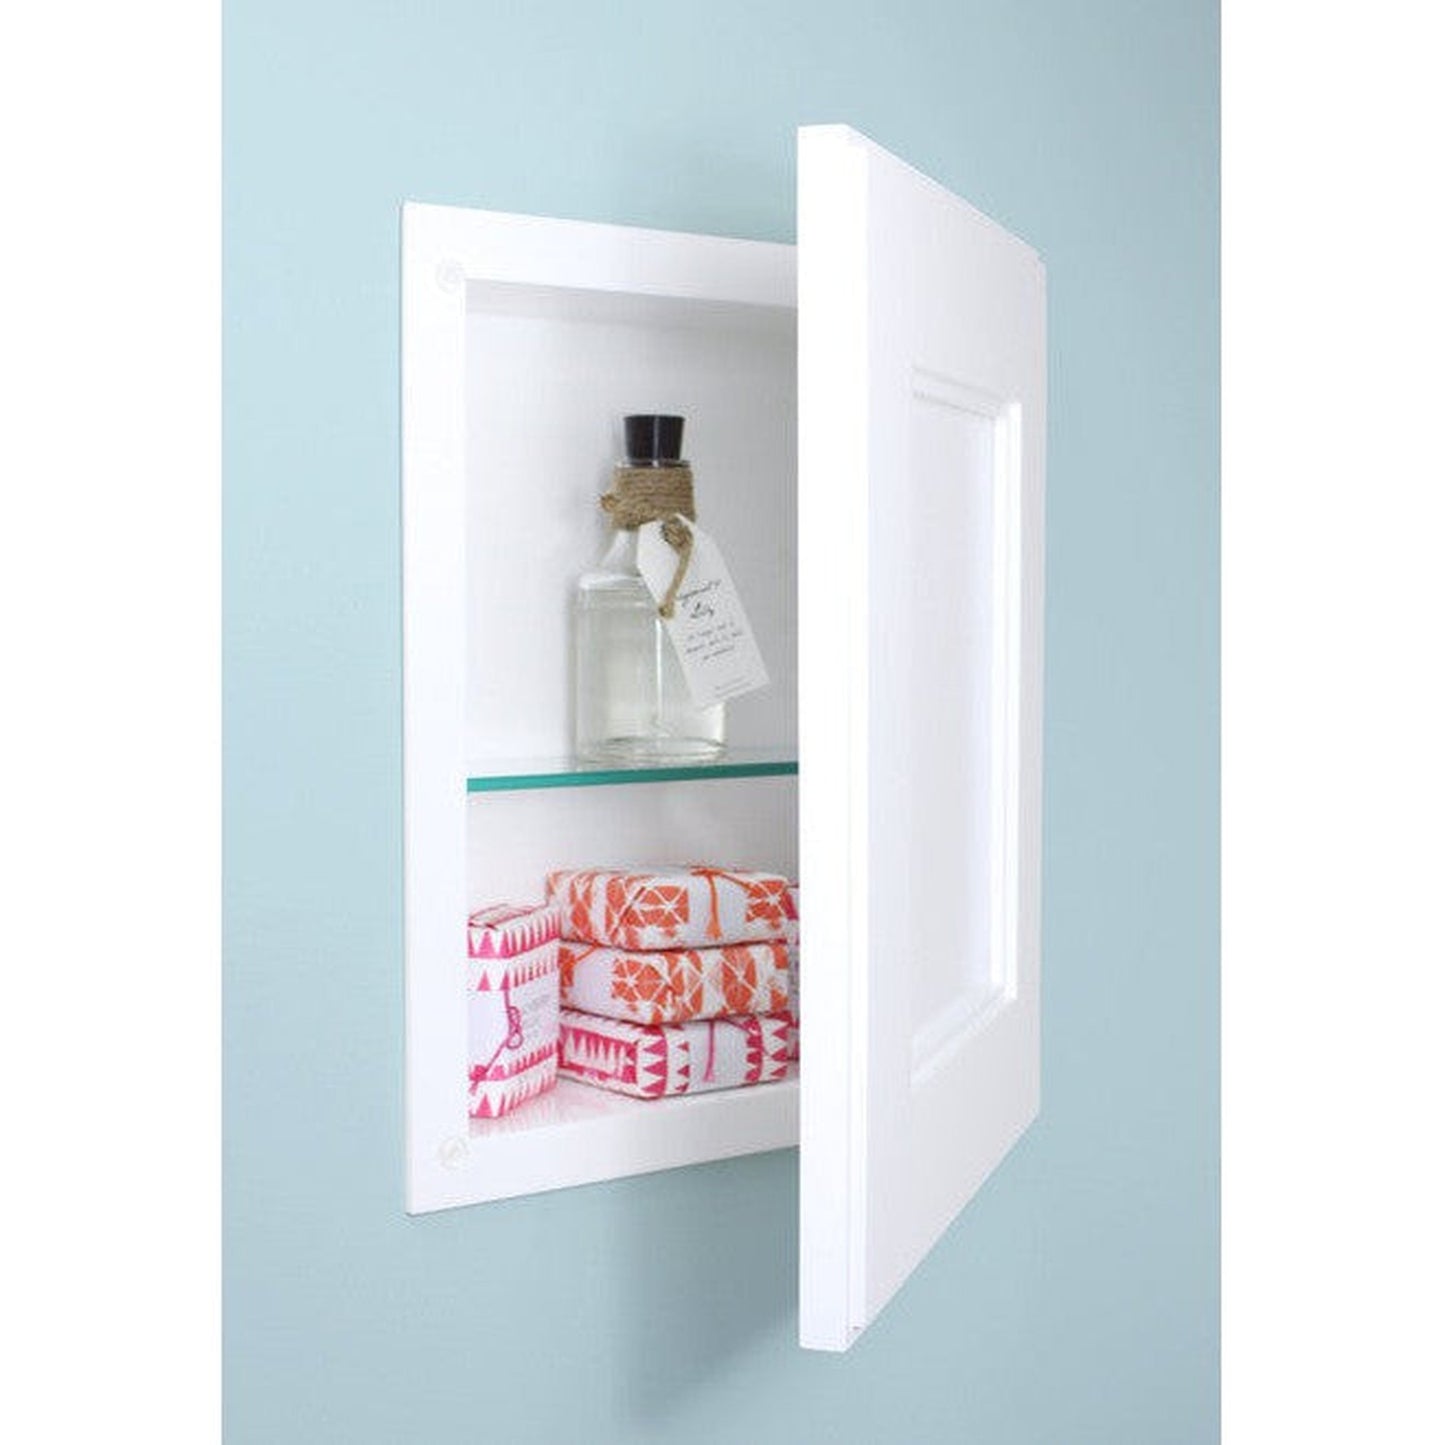 Fox Hollow Furnishings 11" x 14" White Compact Portrait Shaker Style Special 3" Depth Recessed Medicine Cabinet